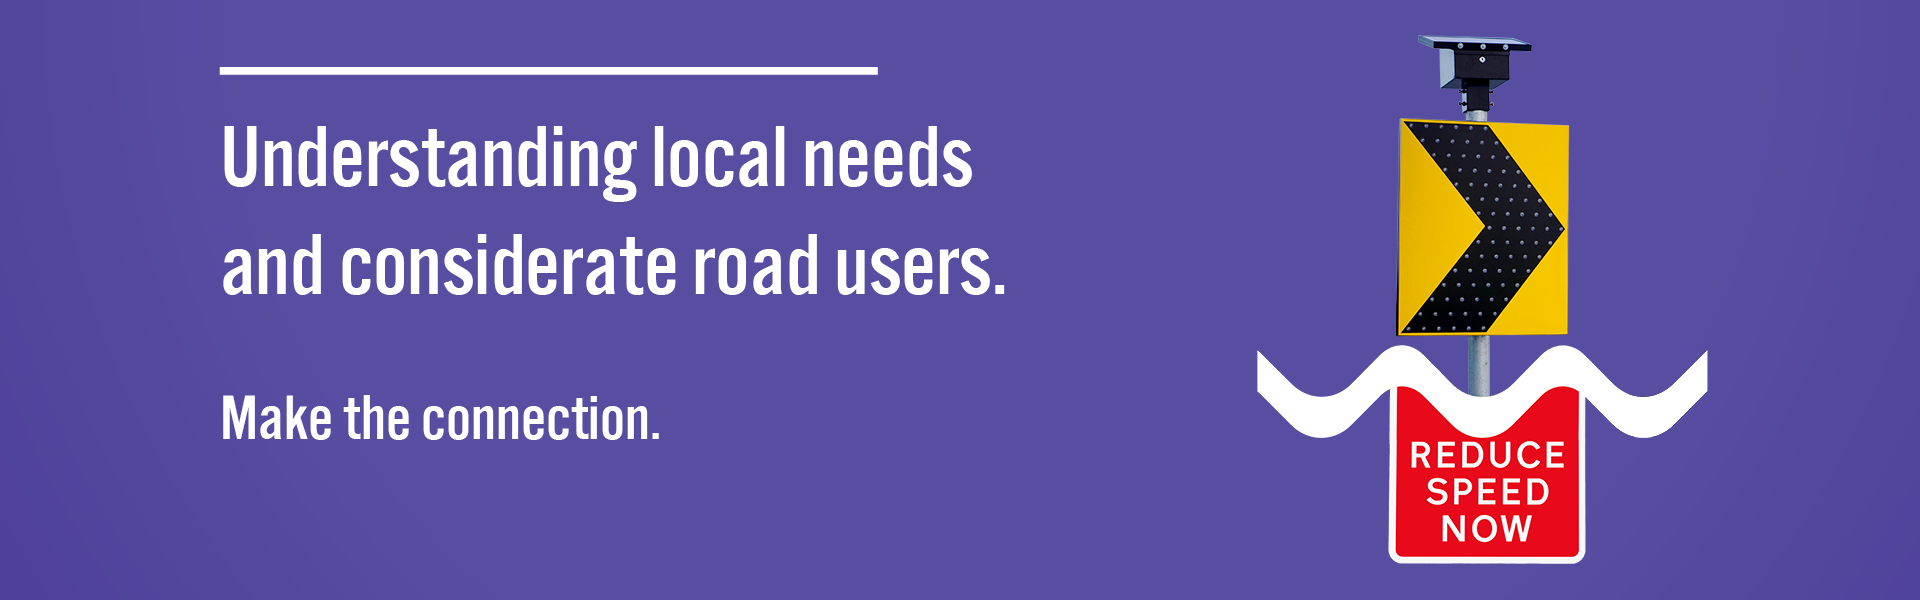 Understanding local needs and considerate road users. Make the connection.